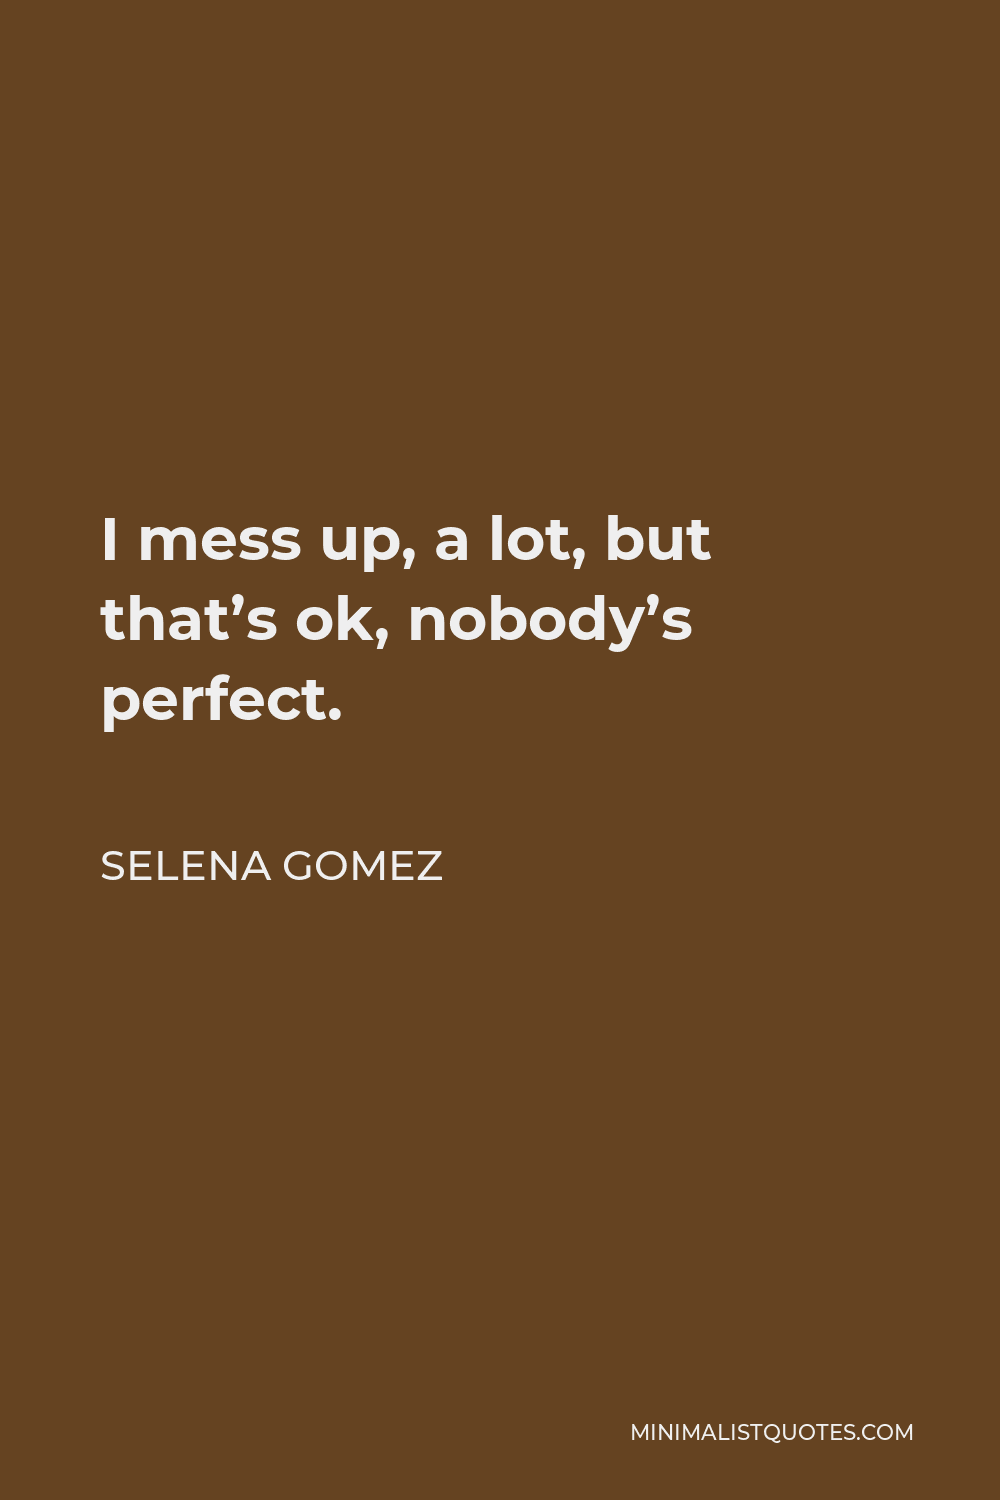 Selena Gomez Quote - I mess up, a lot, but that’s ok, nobody’s perfect.